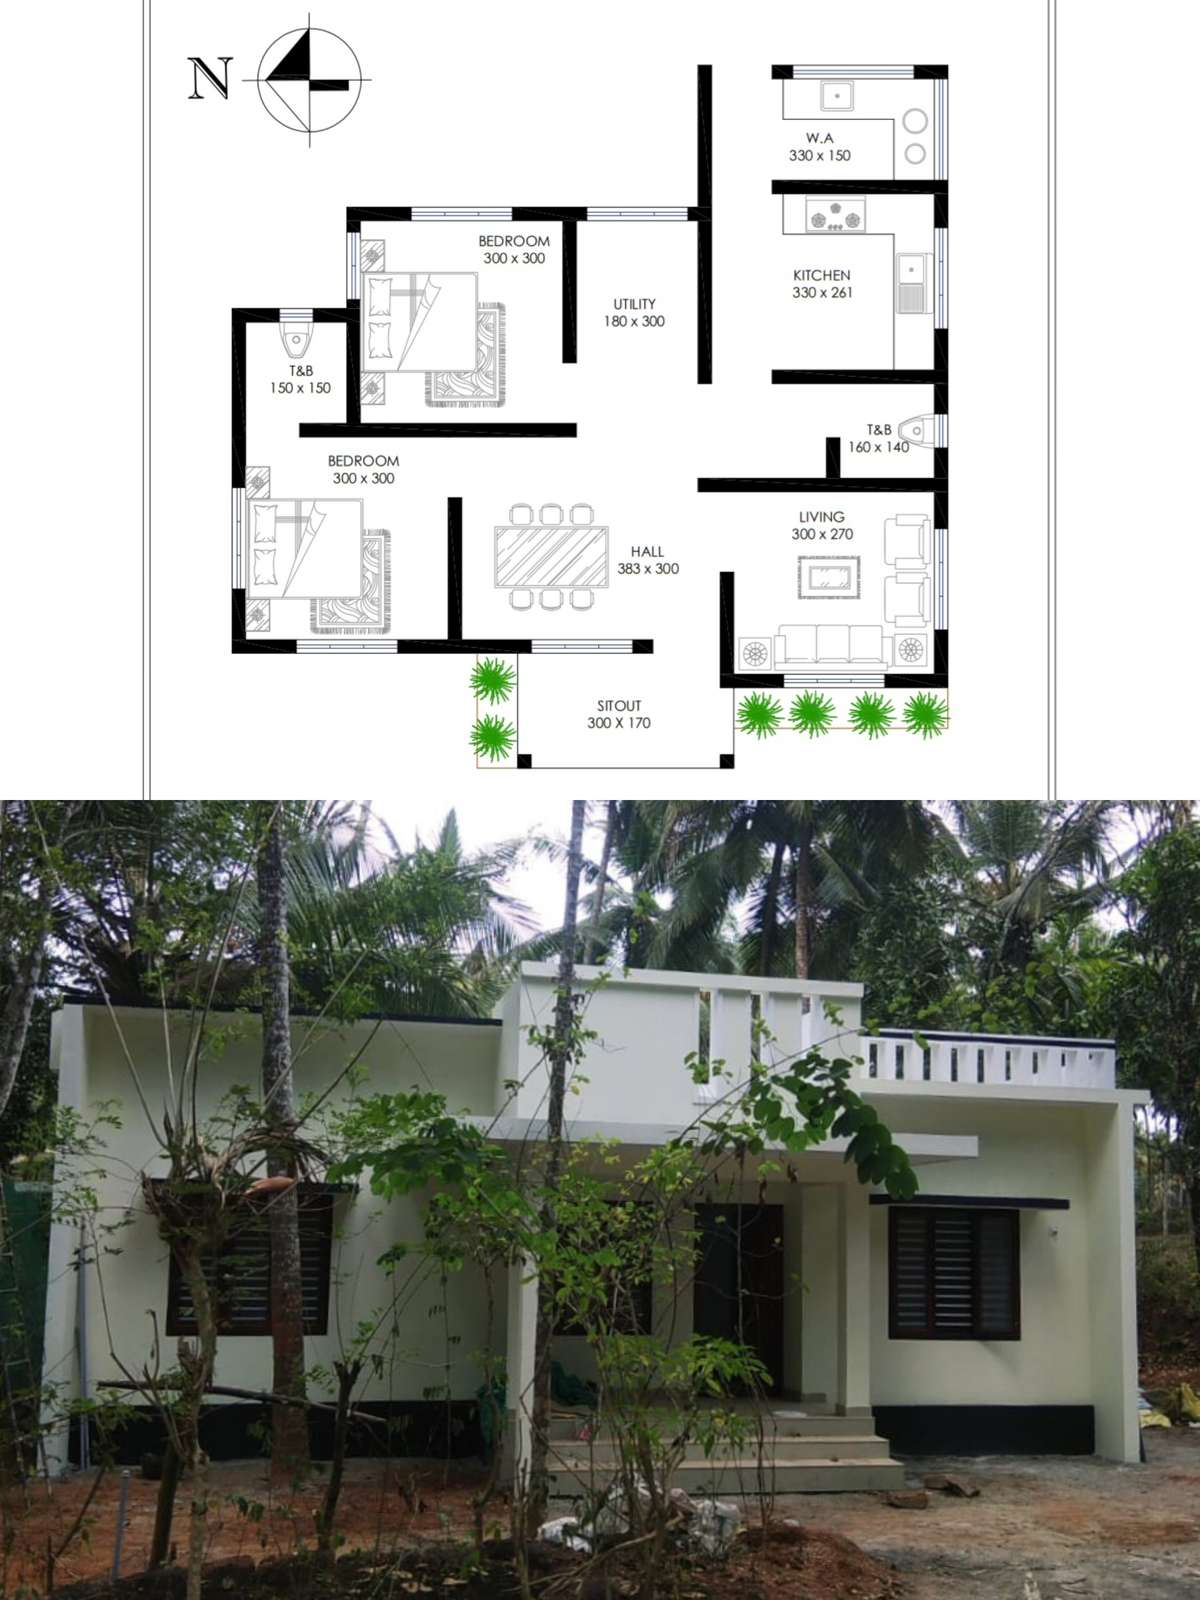 client : hameed 
place : balussery, calicut
area : 897 sqr ft (2bhk)
Budget : 13.5 lakhs